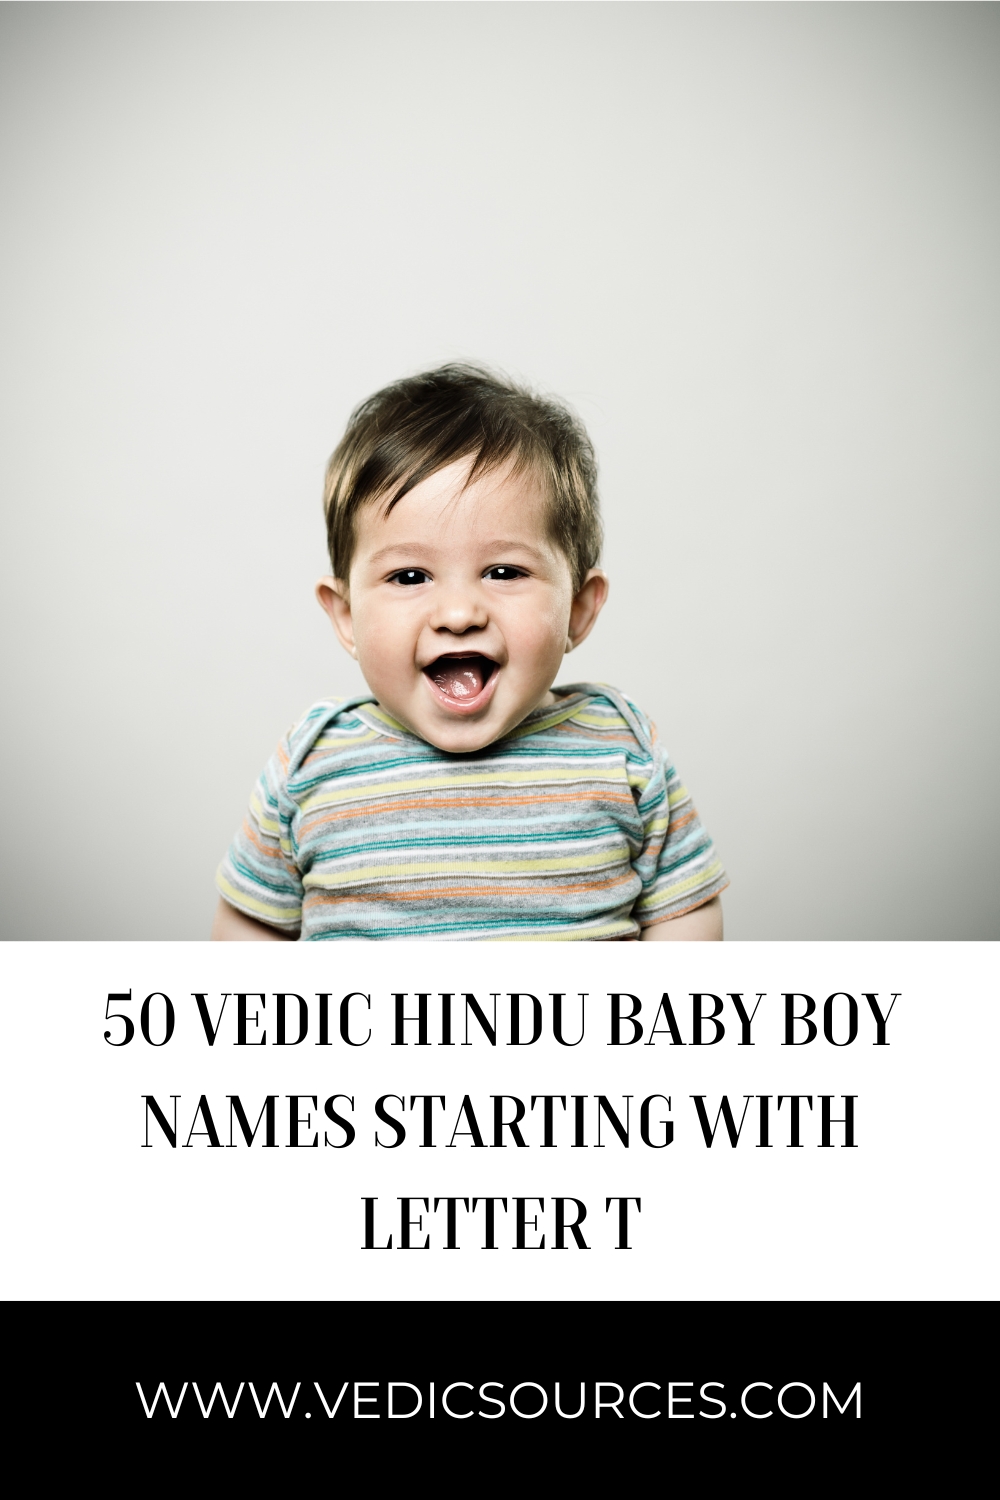 50 Vedic Hindu Baby Boy Names Starting with Letter T